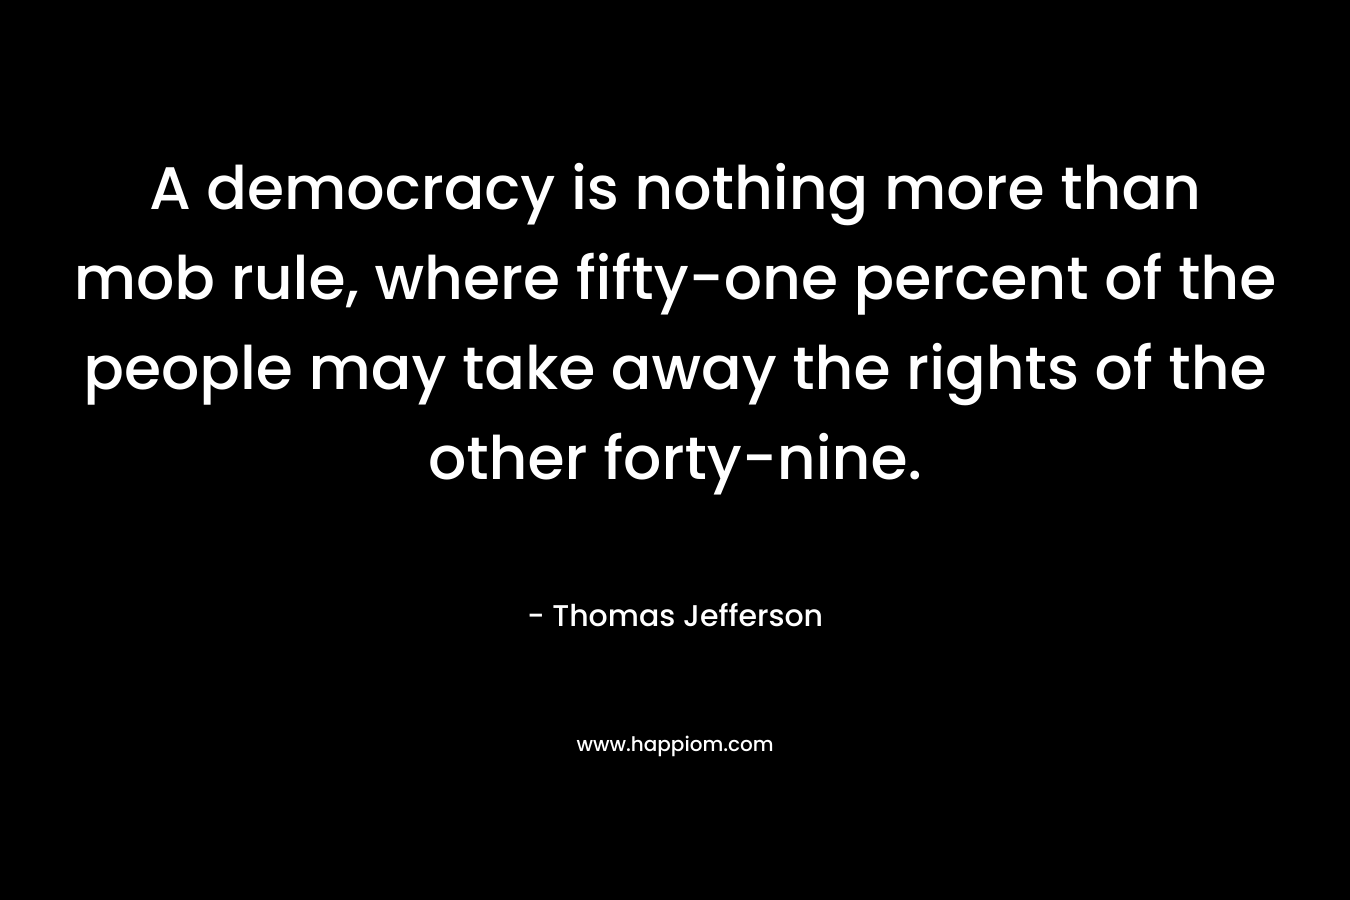 A democracy is nothing more than mob rule, where fifty-one percent of the people may take away the rights of the other forty-nine. – Thomas Jefferson